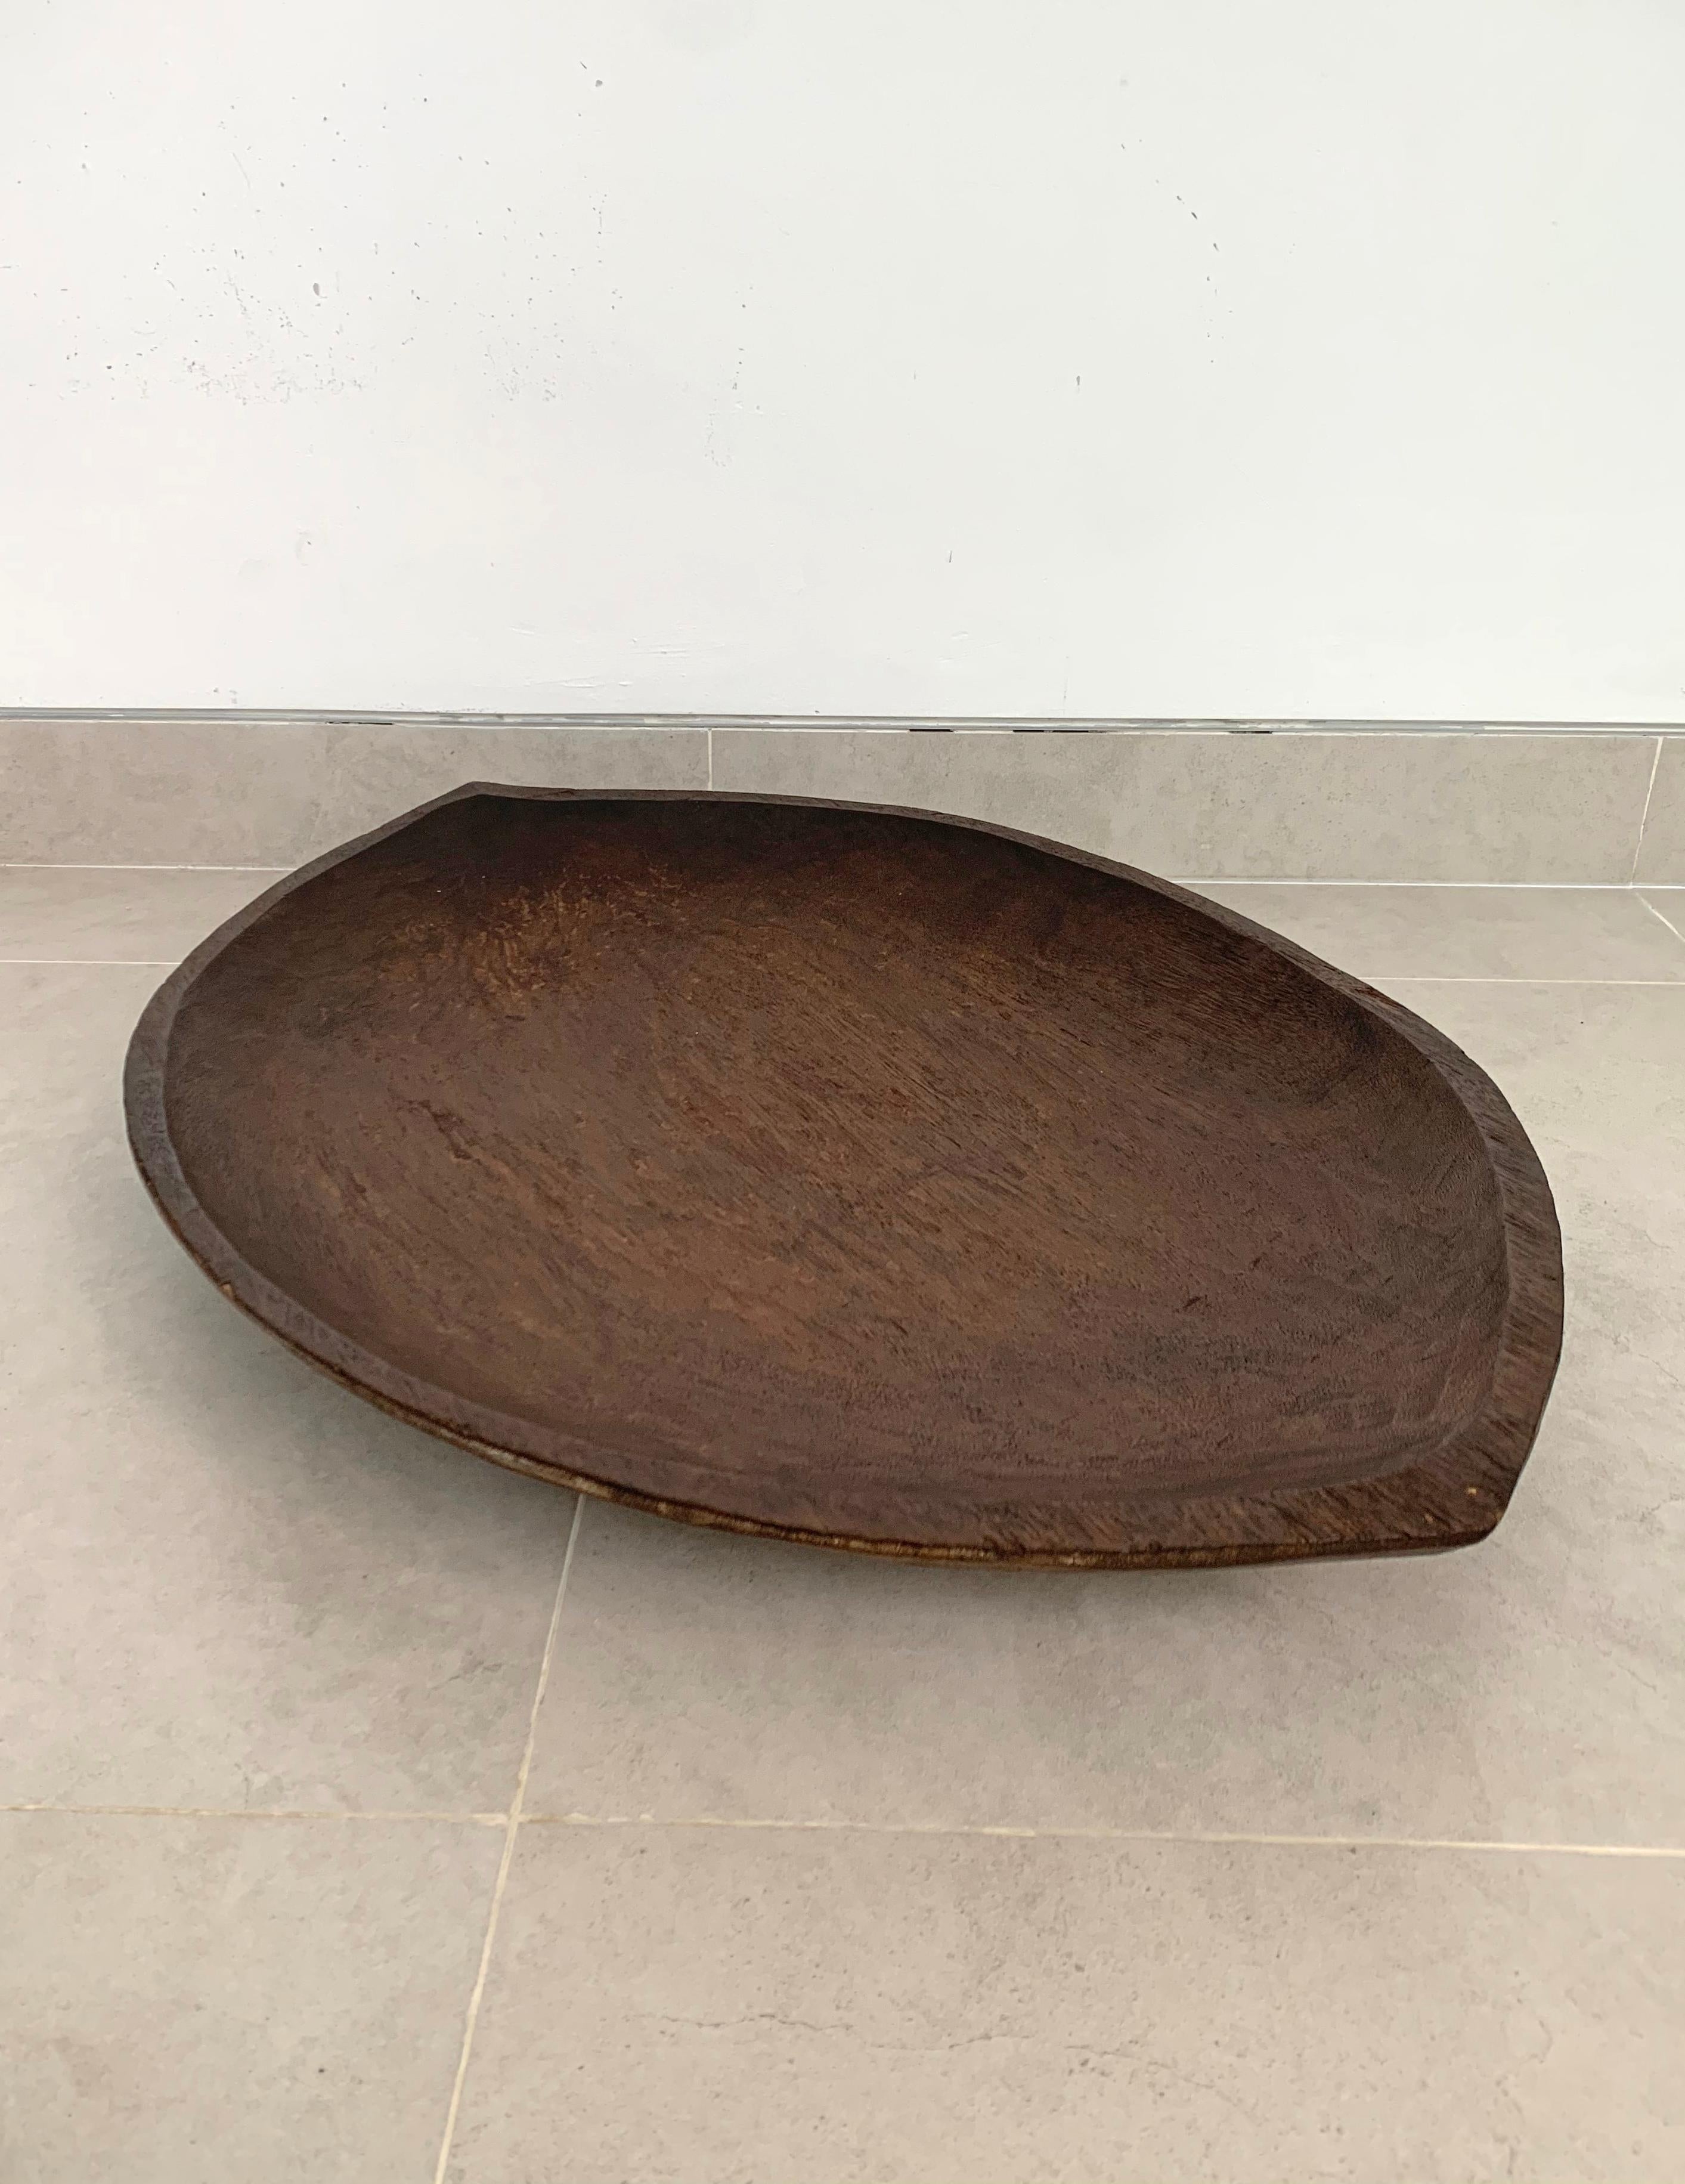 Hand-Carved Wooden Tray / Bowl Mentawai Tribe of Indonesia, Mid-20th Century  For Sale 1